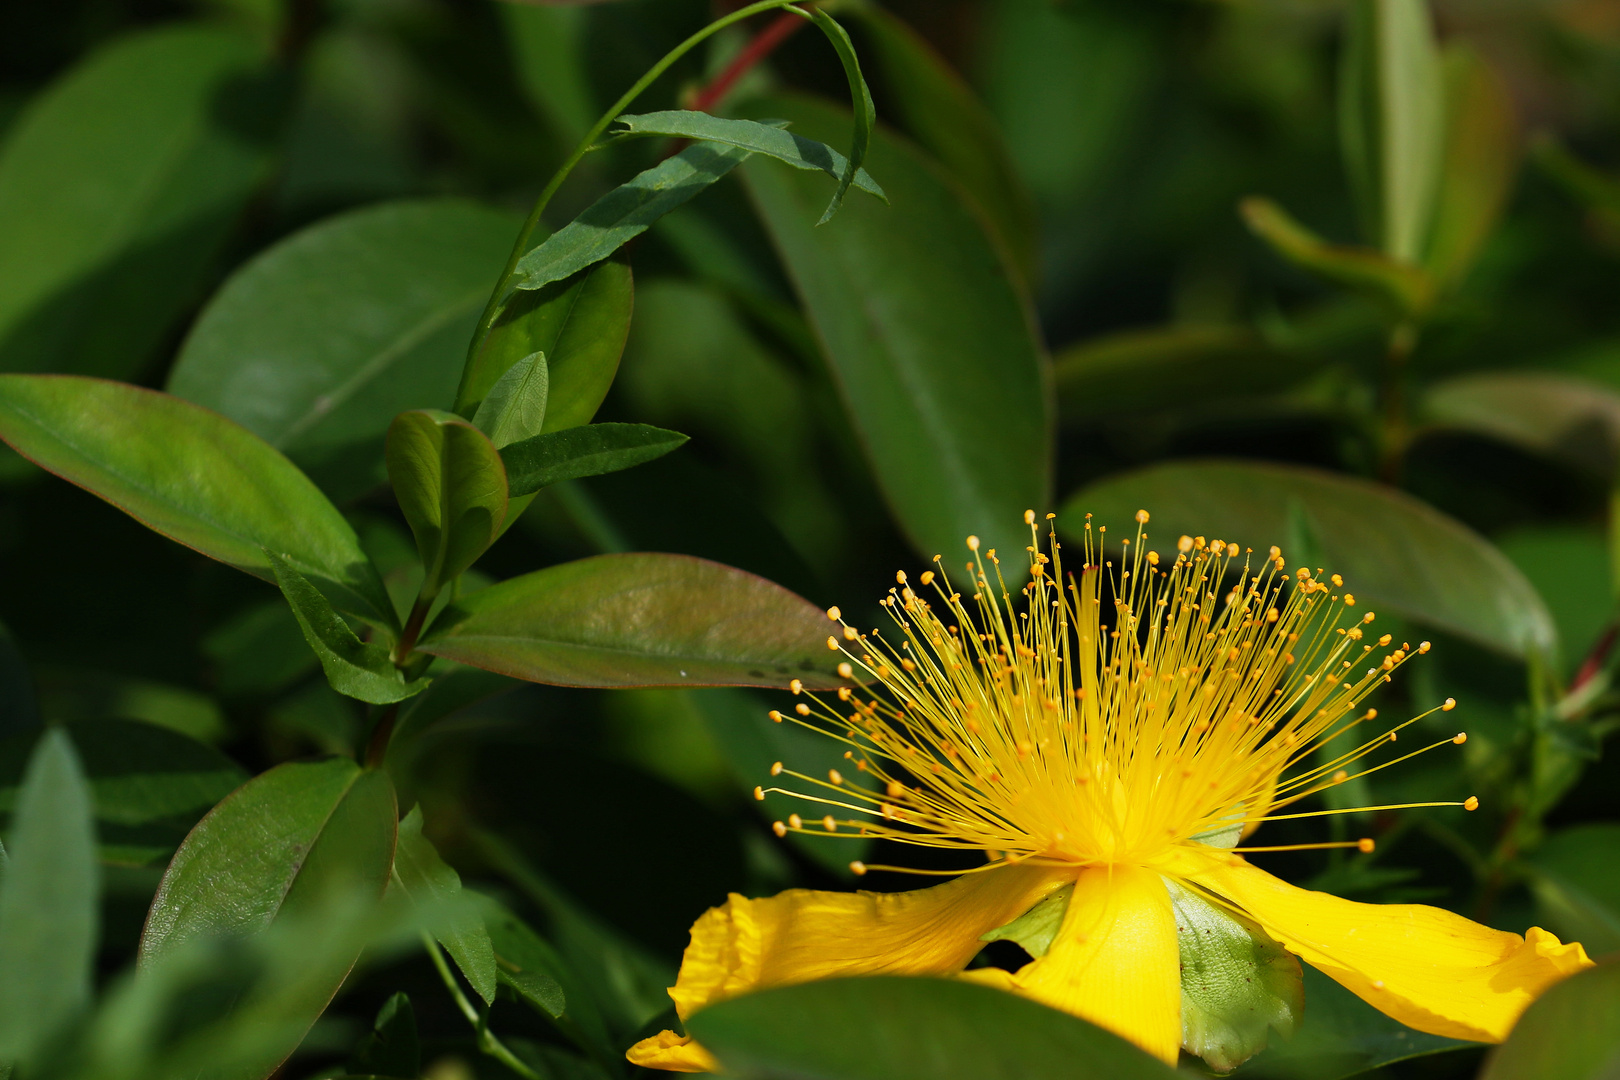 Yellow Myrtle Bloom - Ambient Light